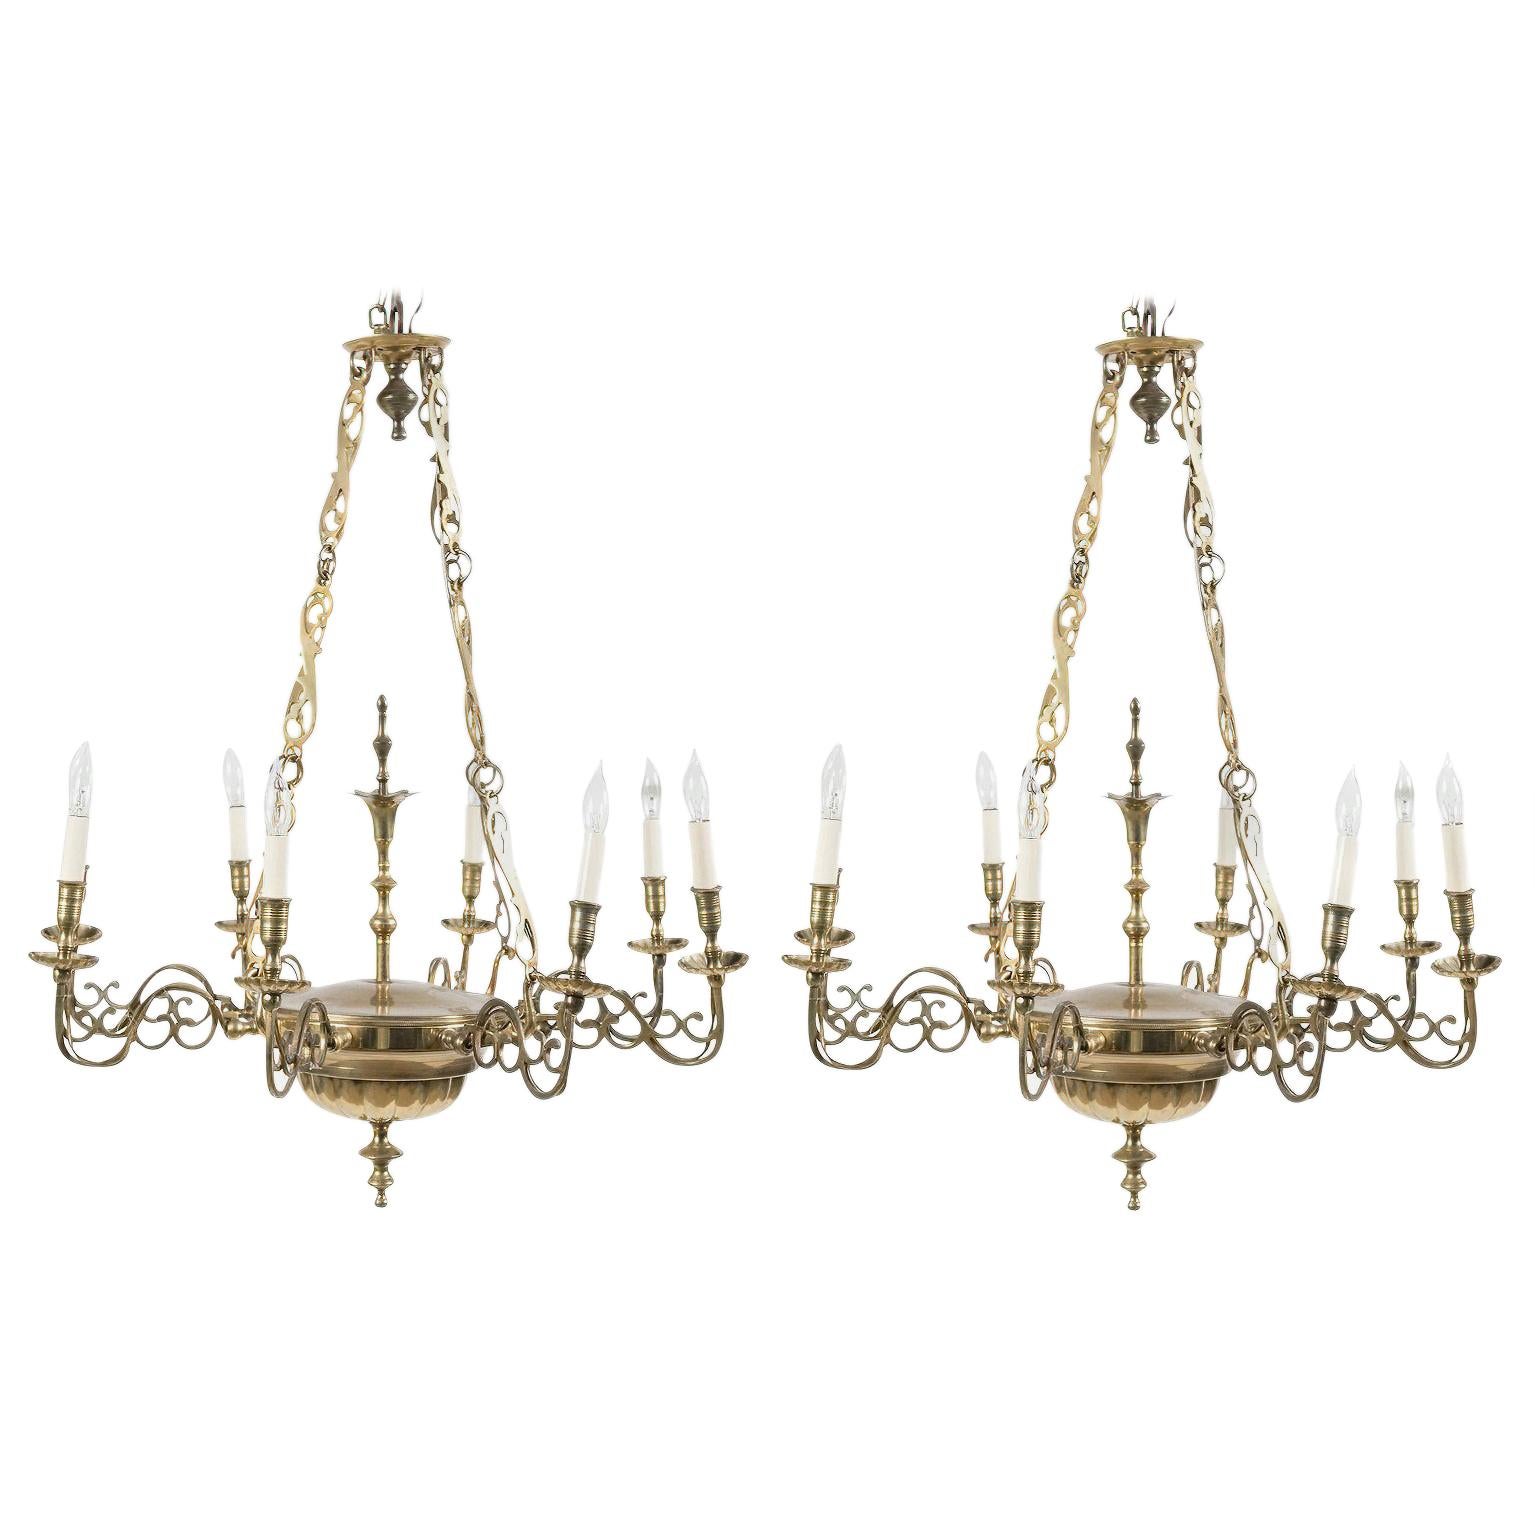 Pair of Queen Anne Style Chandeliers